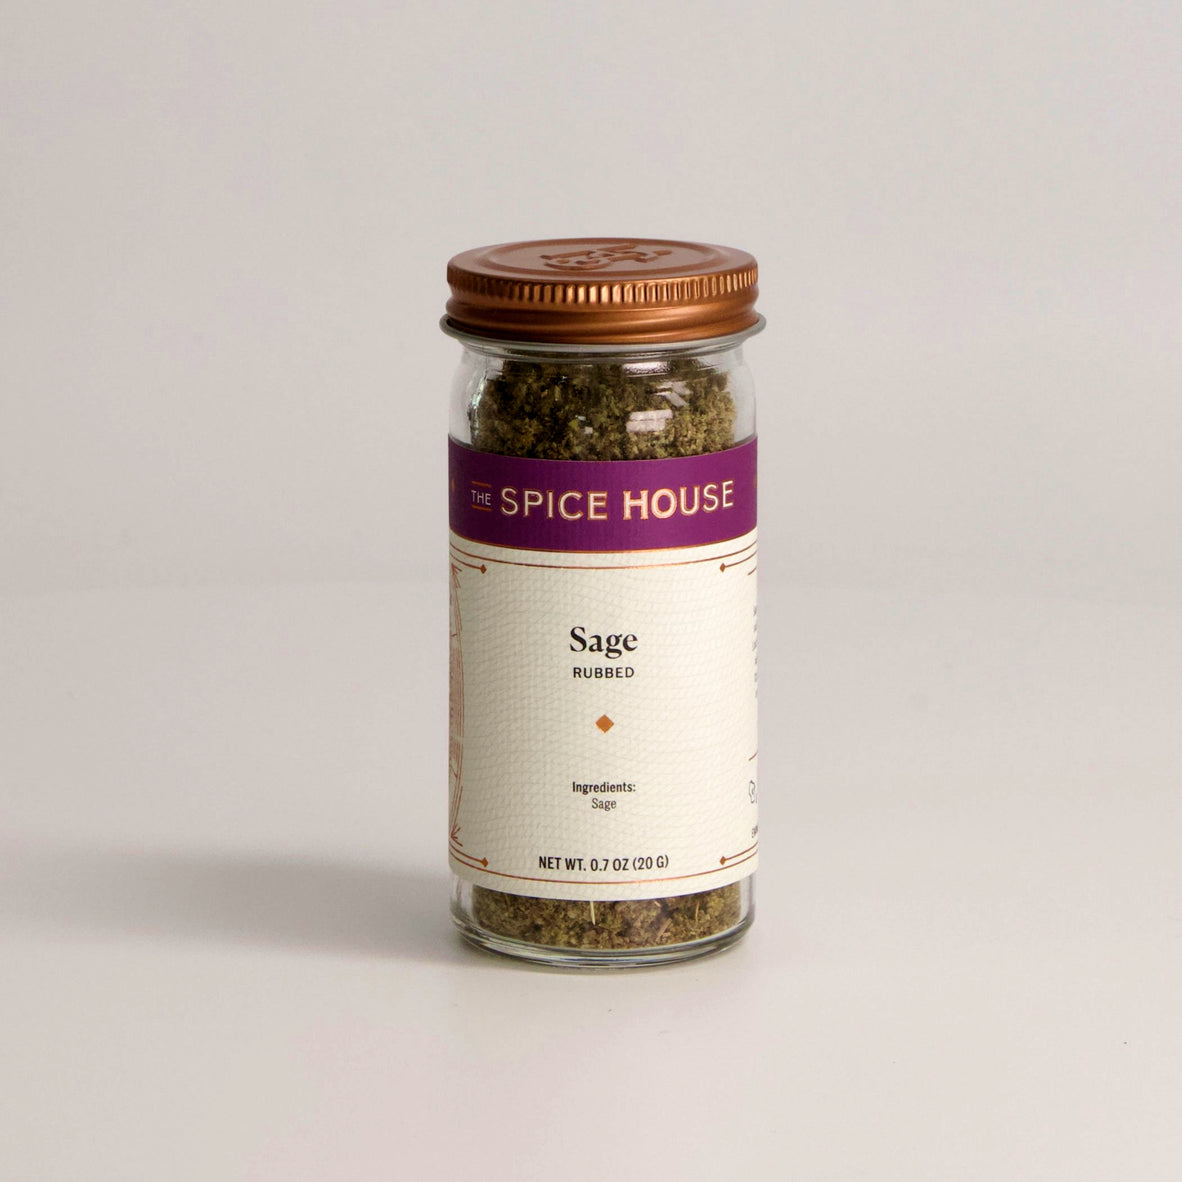 Dried Rubbed Sage | Rubbed Sage Leaf | The Spice House Jar, 1/2 Cup, 0.7 oz.